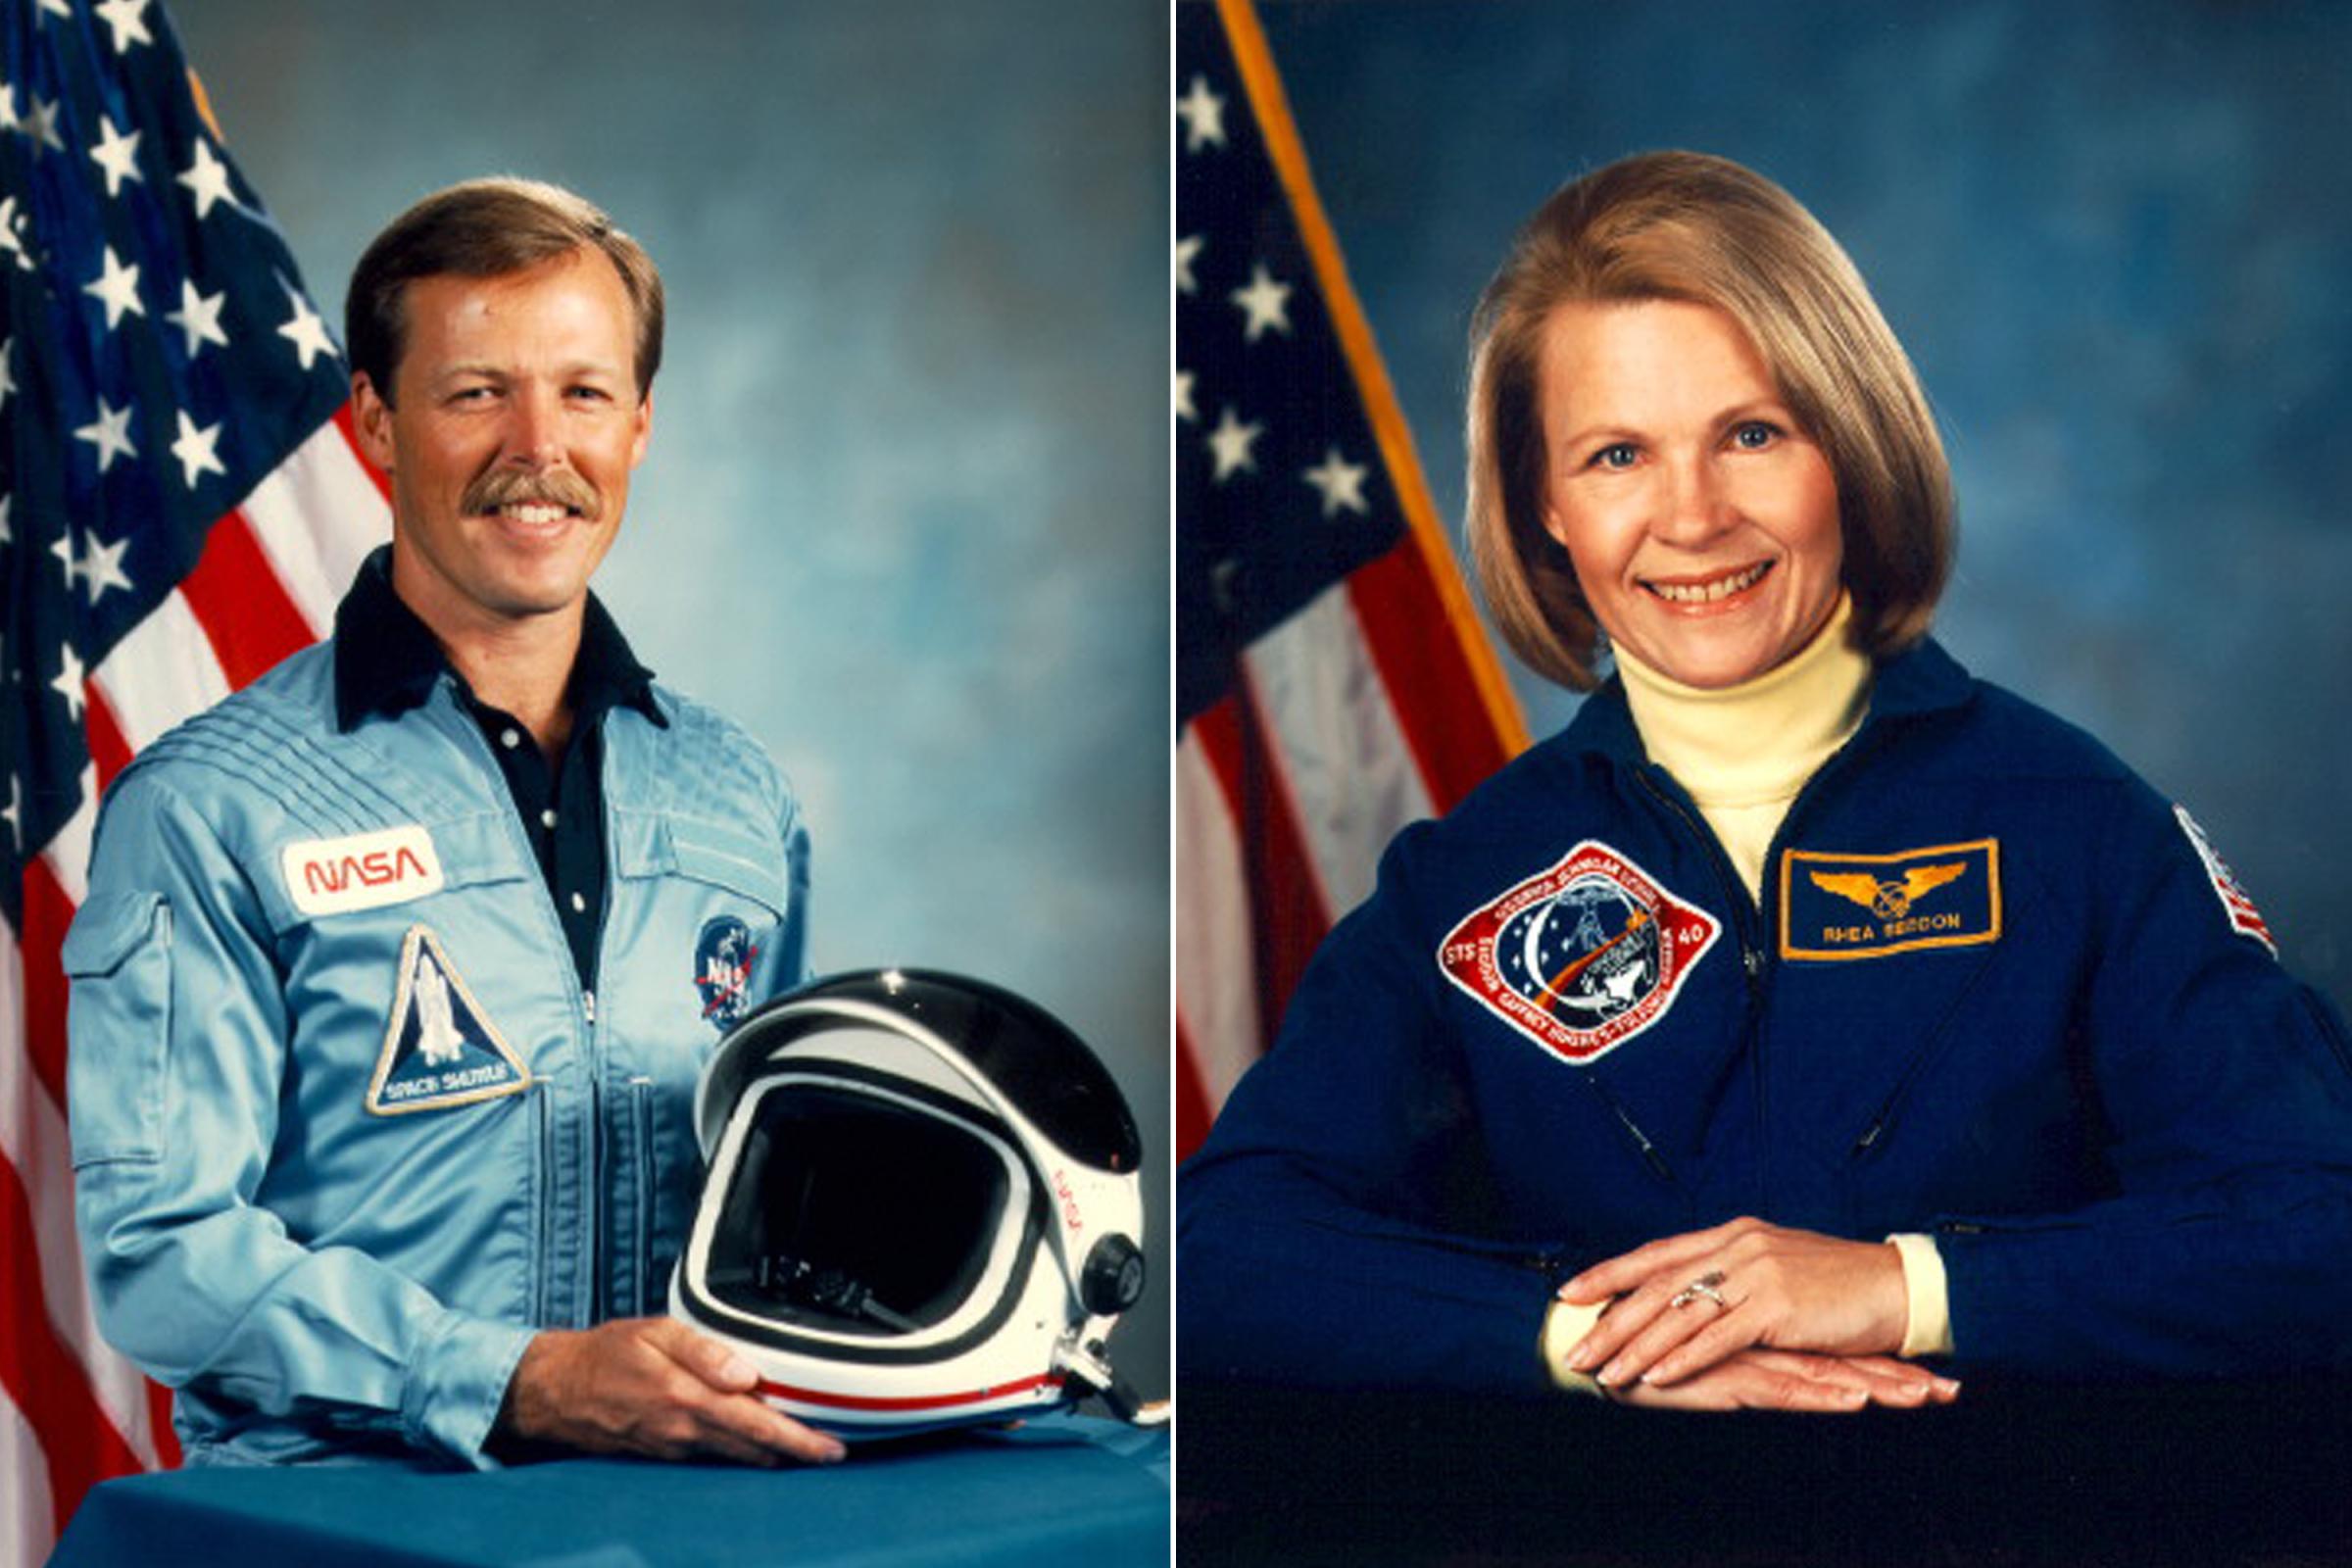 Hoot Gibson and Rhea Seddon were married on May 30, 1981. They are still married today with three children, Paul, Dann, and Emilee. Between them they have flown eight times, five flown by Gibson and three by Seddon.